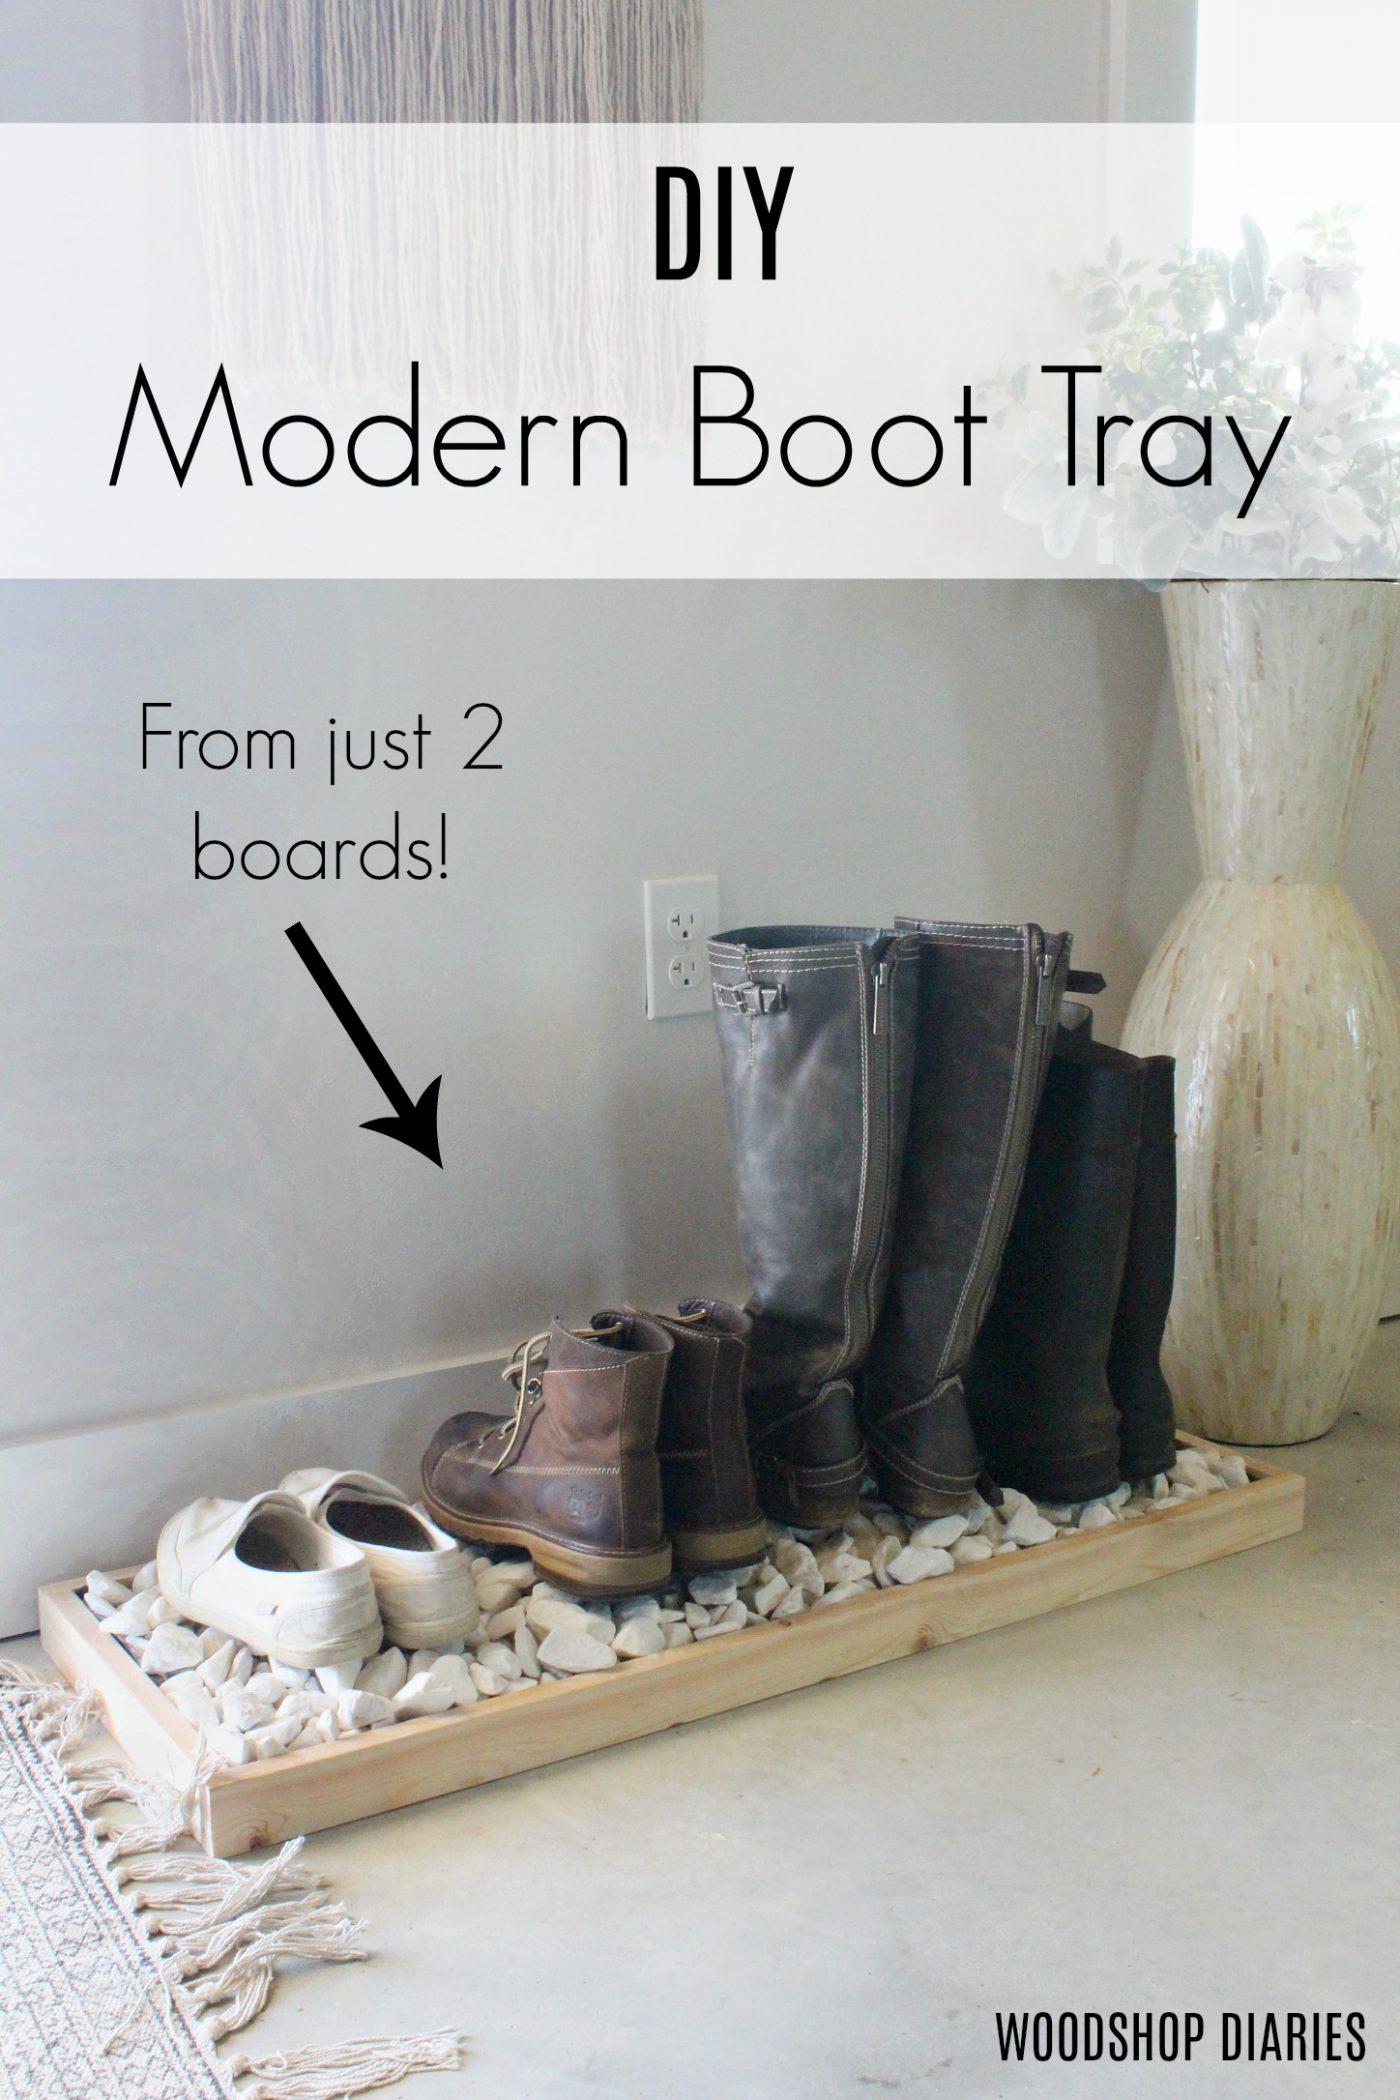 https://www.woodshopdiaries.com/wp-content/uploads/2018/10/DIY-Modern-Boot-Tray-from-Just-2-boards-Pin.jpg